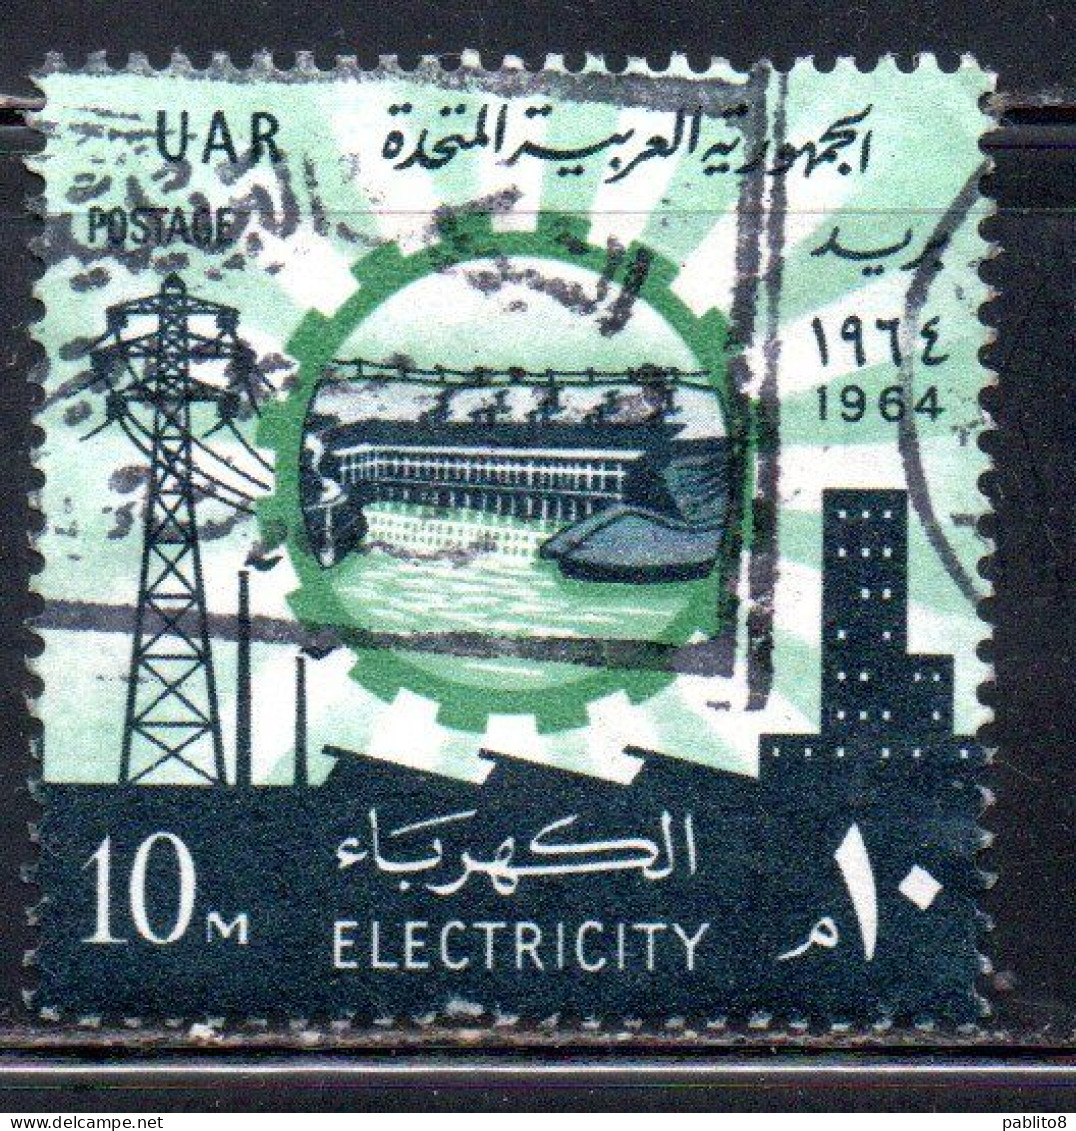 UAR EGYPT EGITTO 1964 ELECTRICITY ASWAN HIGH DAM HYDROELICTRIC POWER STATION LAND RECLAMATION 10m USED USATO - Gebraucht